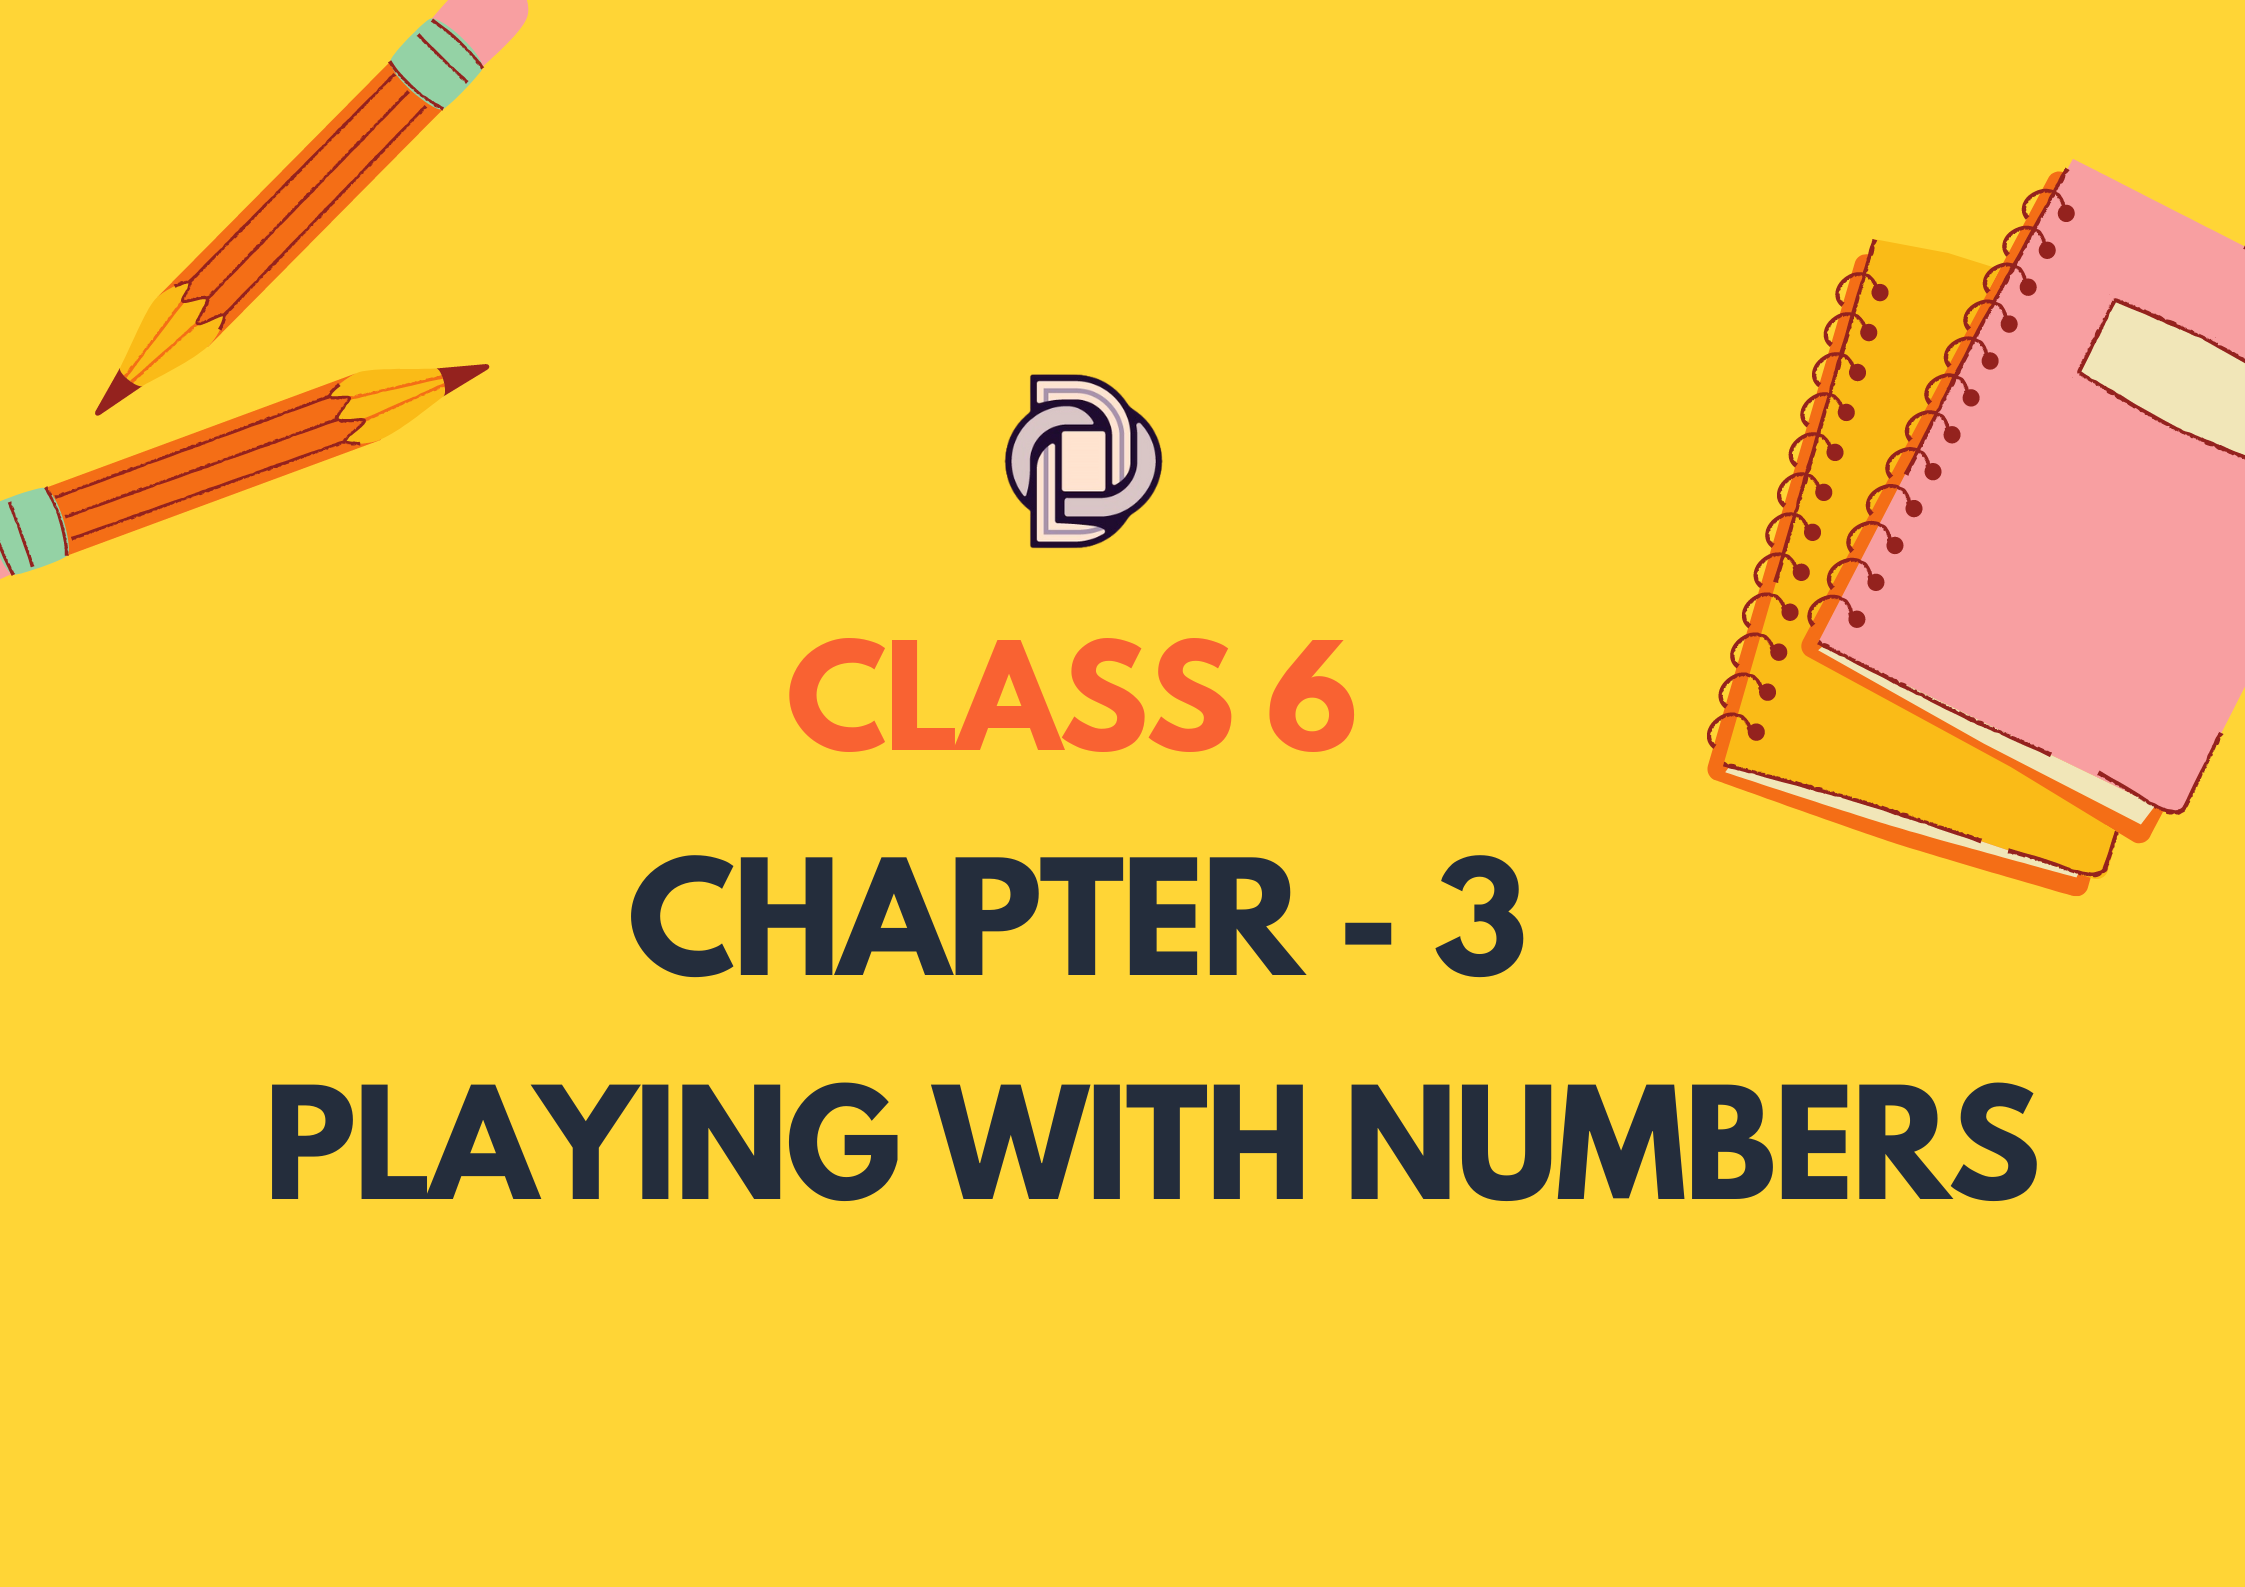 CHAPTER 3 PLAYING WITH NUMBERS